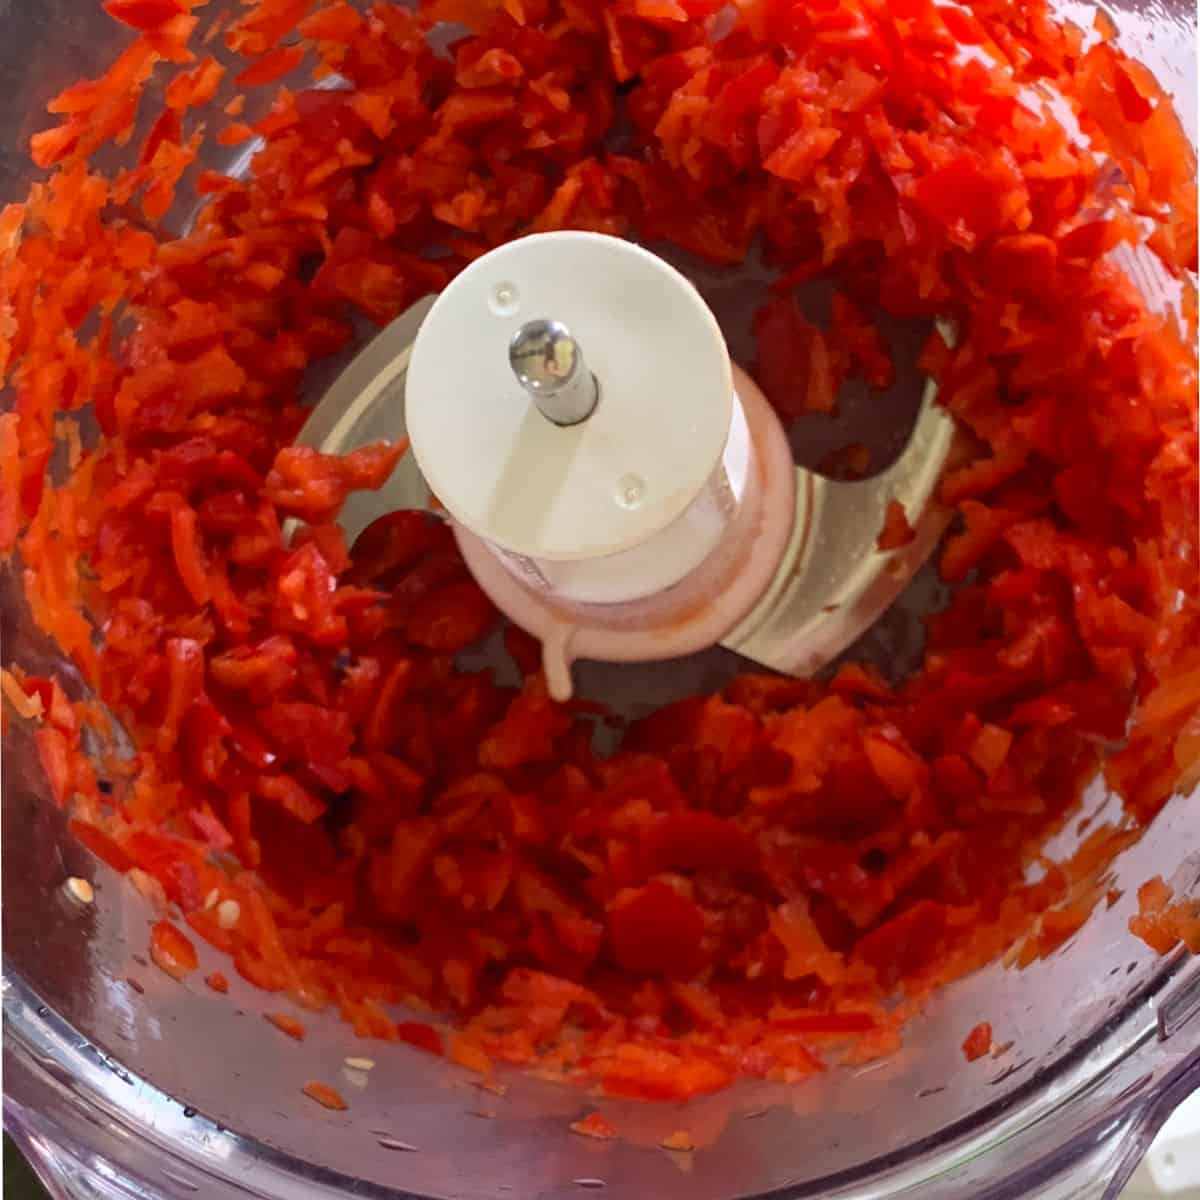 Processed fresno chili peppers. 